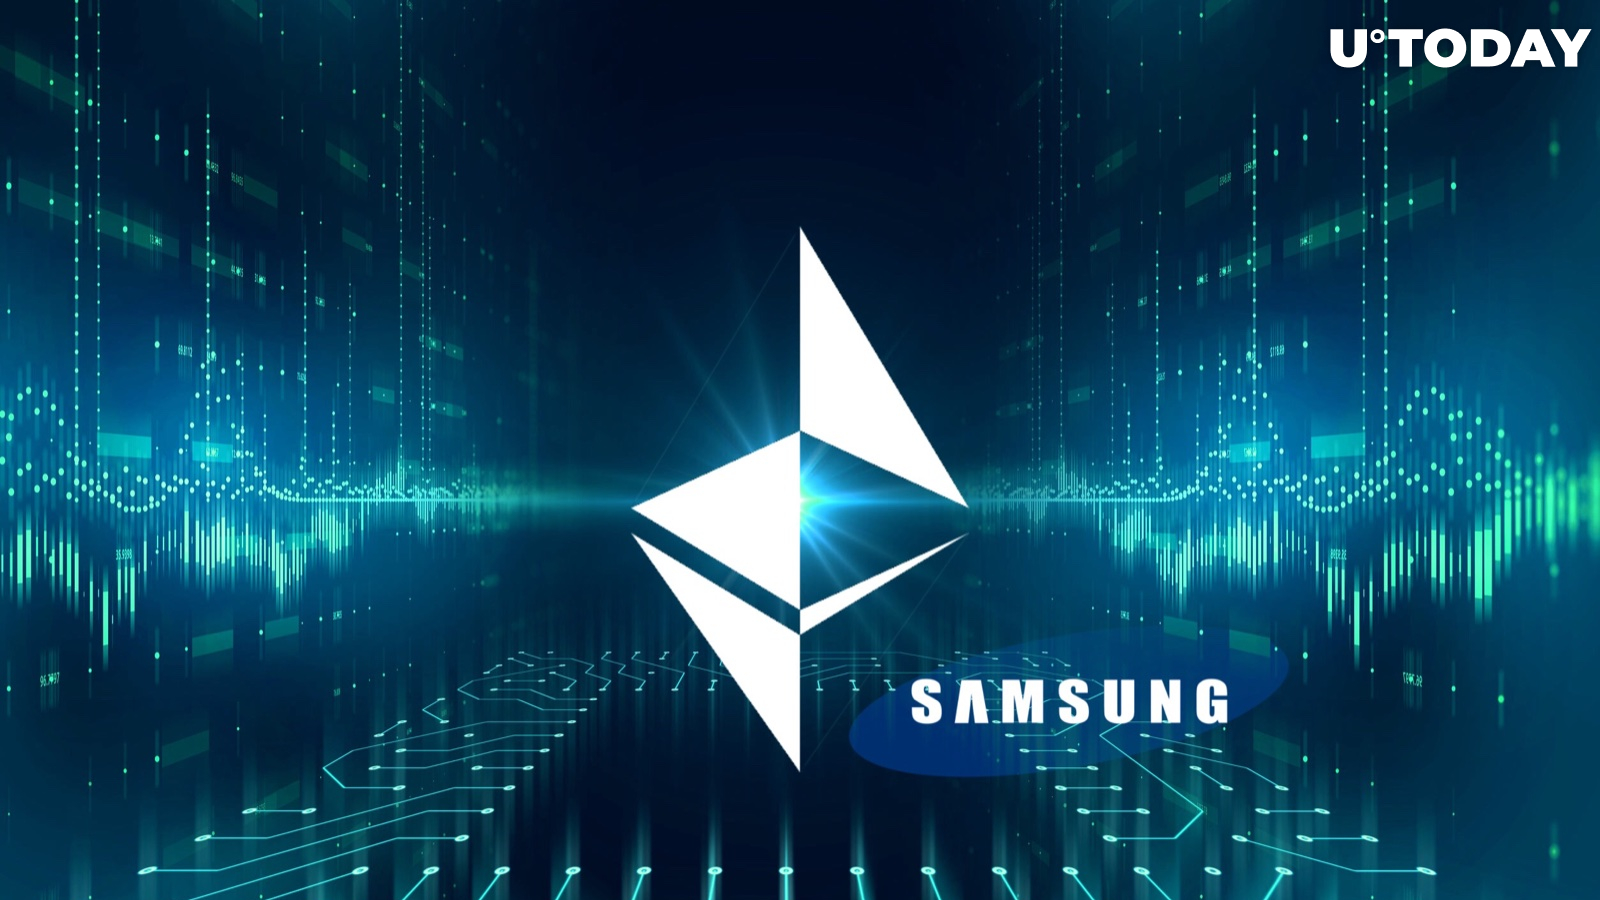 Ethereum-Powered Blockchain and Own Coin Release Planned by Samsung